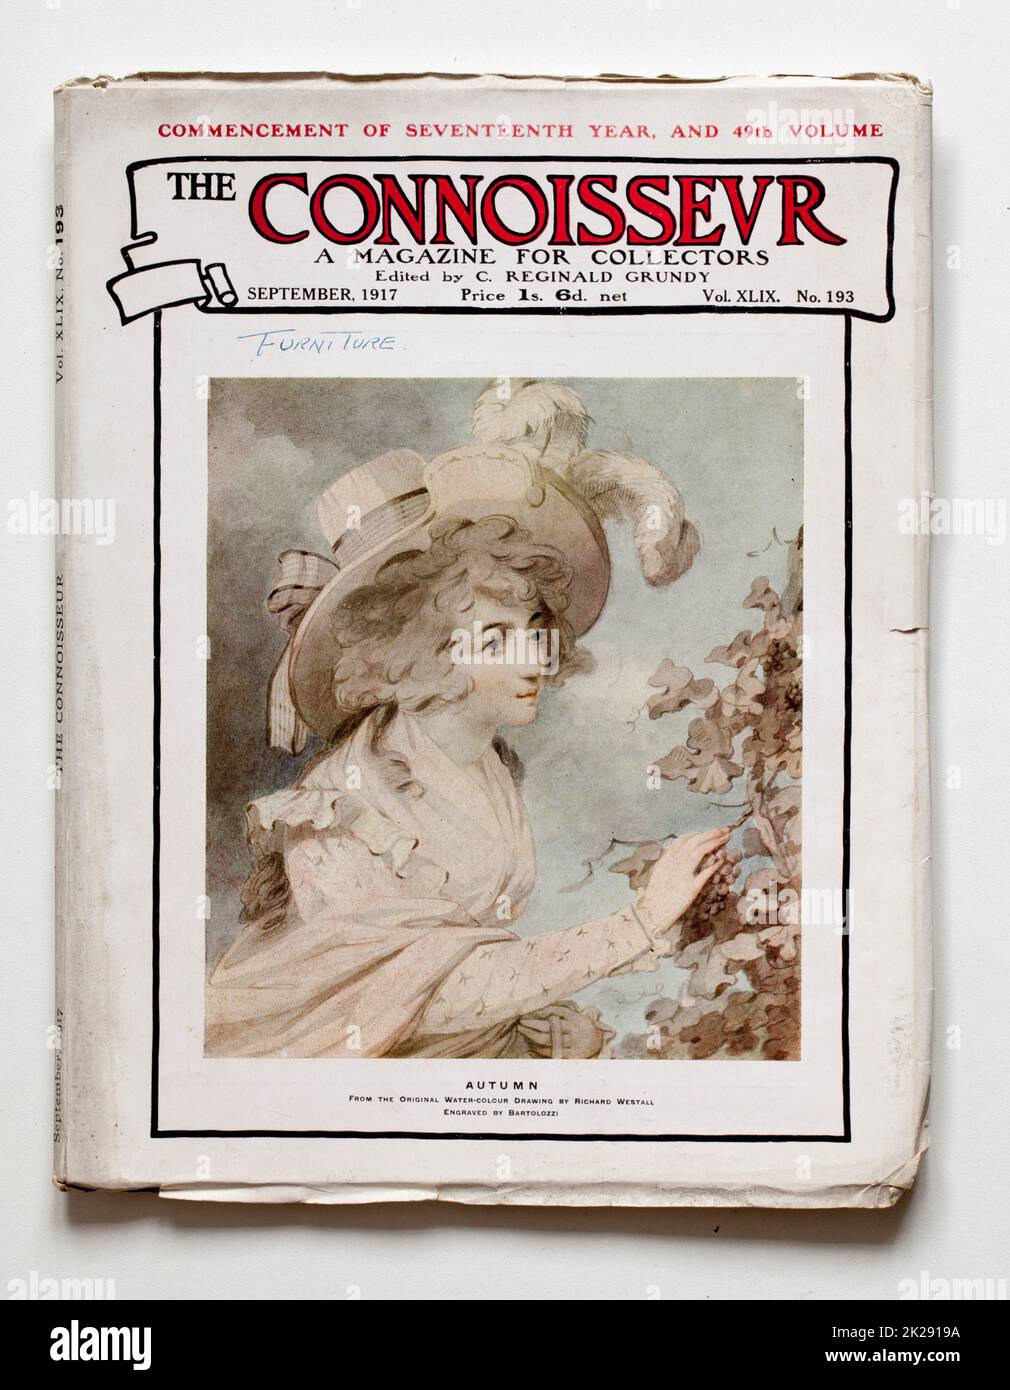 1917 Issue of The Connoisseur Magazine Stock Photo